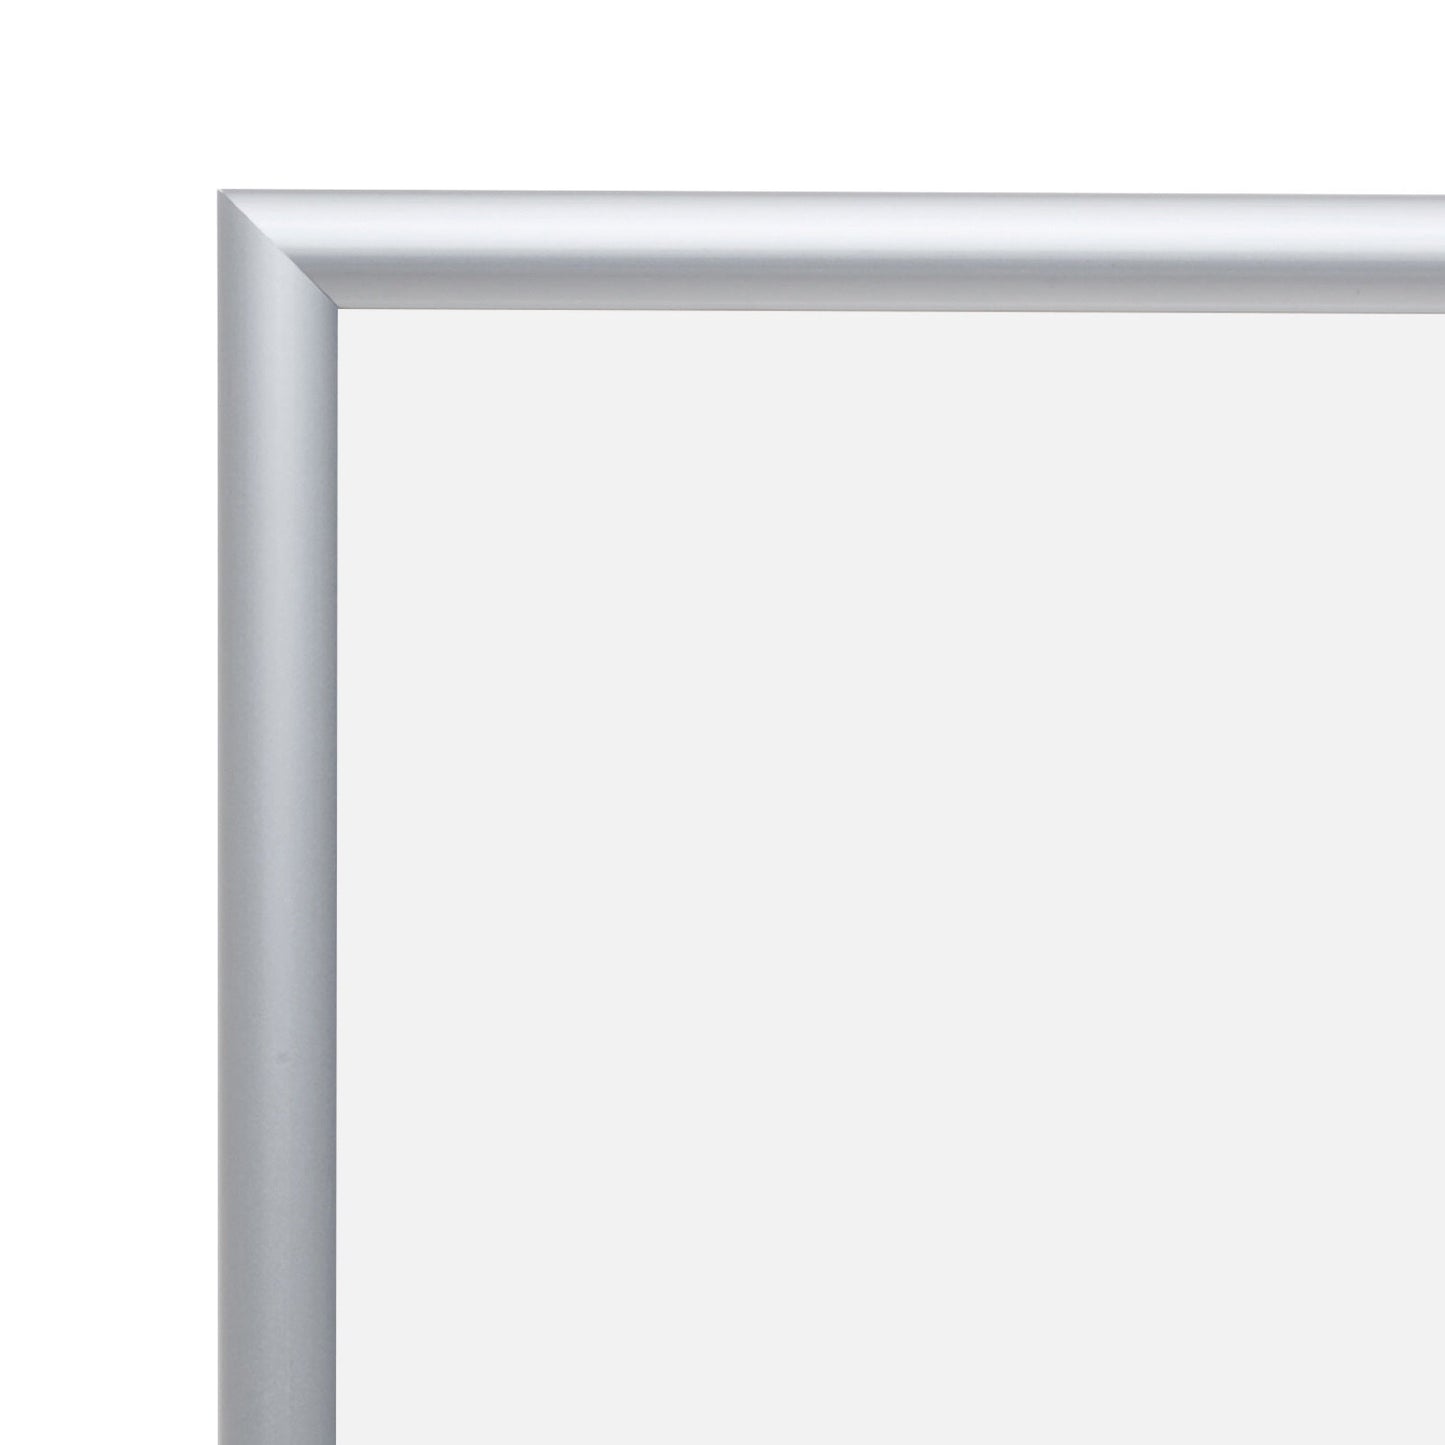 Load image into Gallery viewer, 27x40 Silver SnapeZo® Snap Frame - 1&amp;quot; Profile
